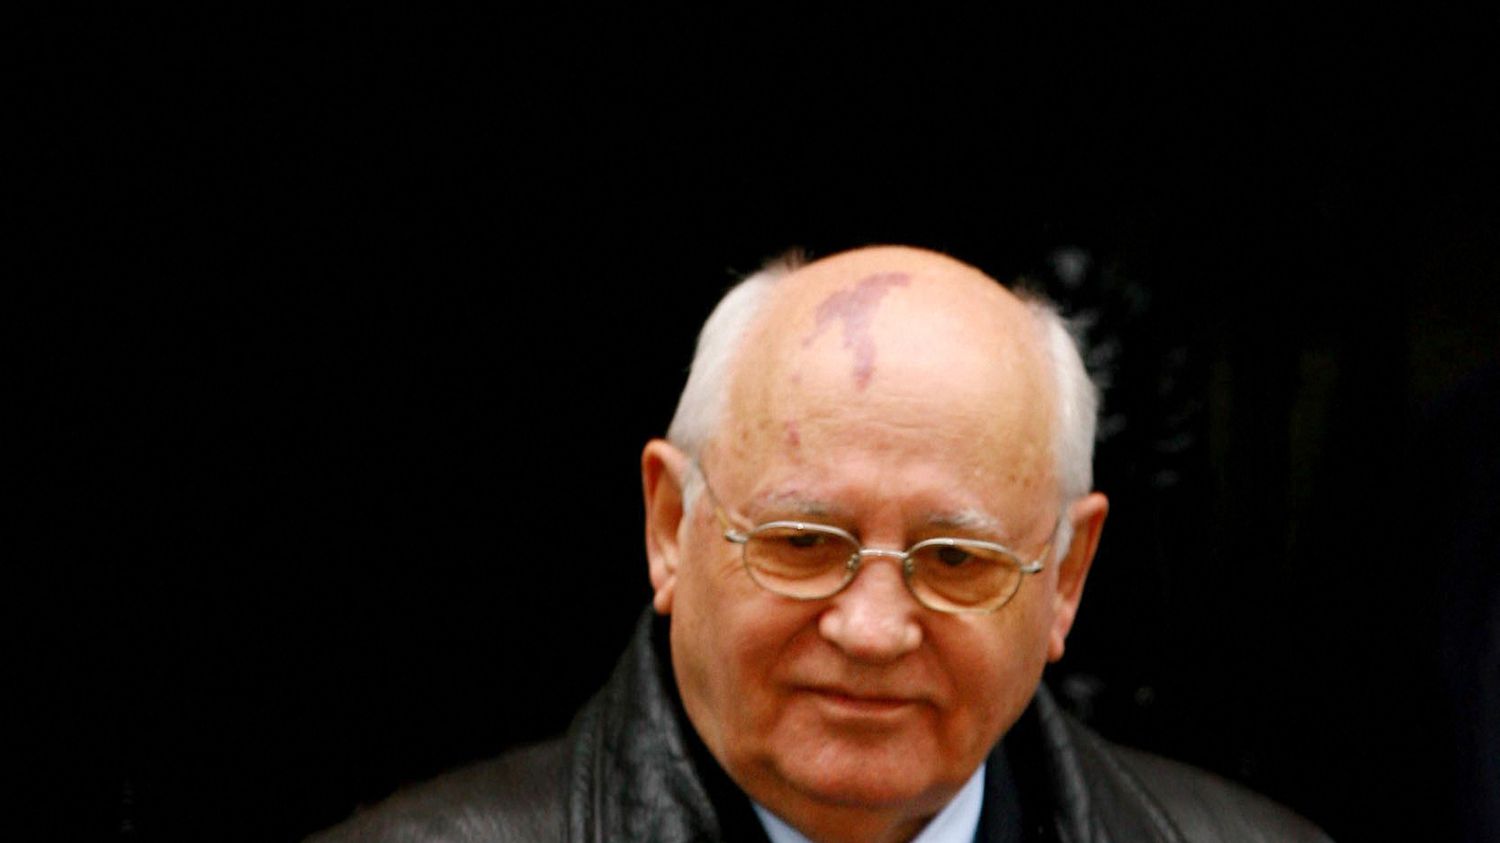 Russia: Mikhail Gorbachev, last president of the USSR, died at the age of 91, announces a hospital dependent on the Russian presidency
